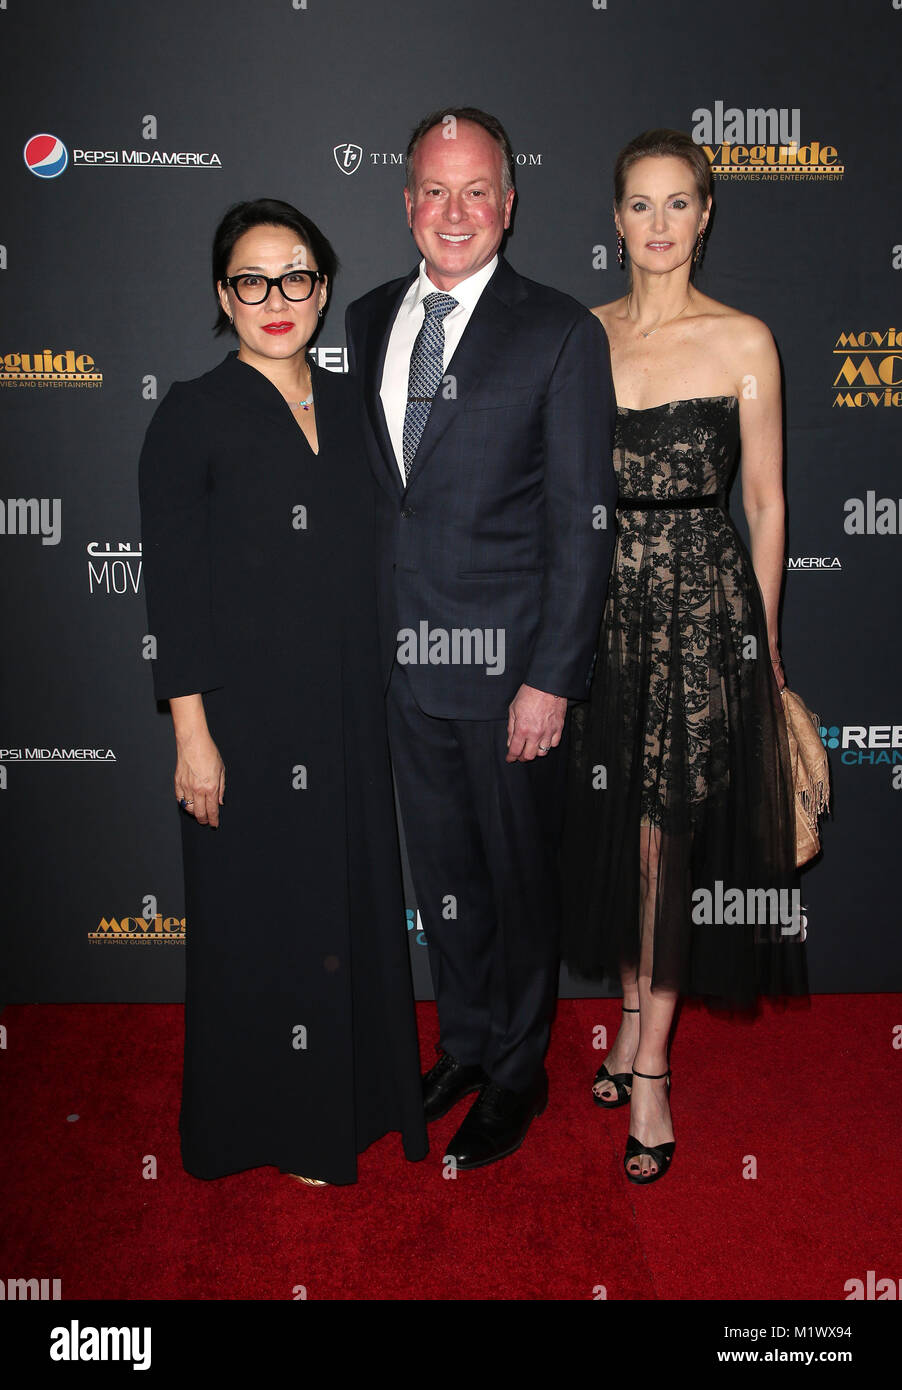 UNIVERSAL CITY, CA - Ramsey Ann Naito, Tom McGrath, Guest, at the 26th Annual Movieguide Awards at The Universal Hilton in Universal City, California on February 2, 2018. Credit: Faye Sadou/MediaPunch Stock Photo